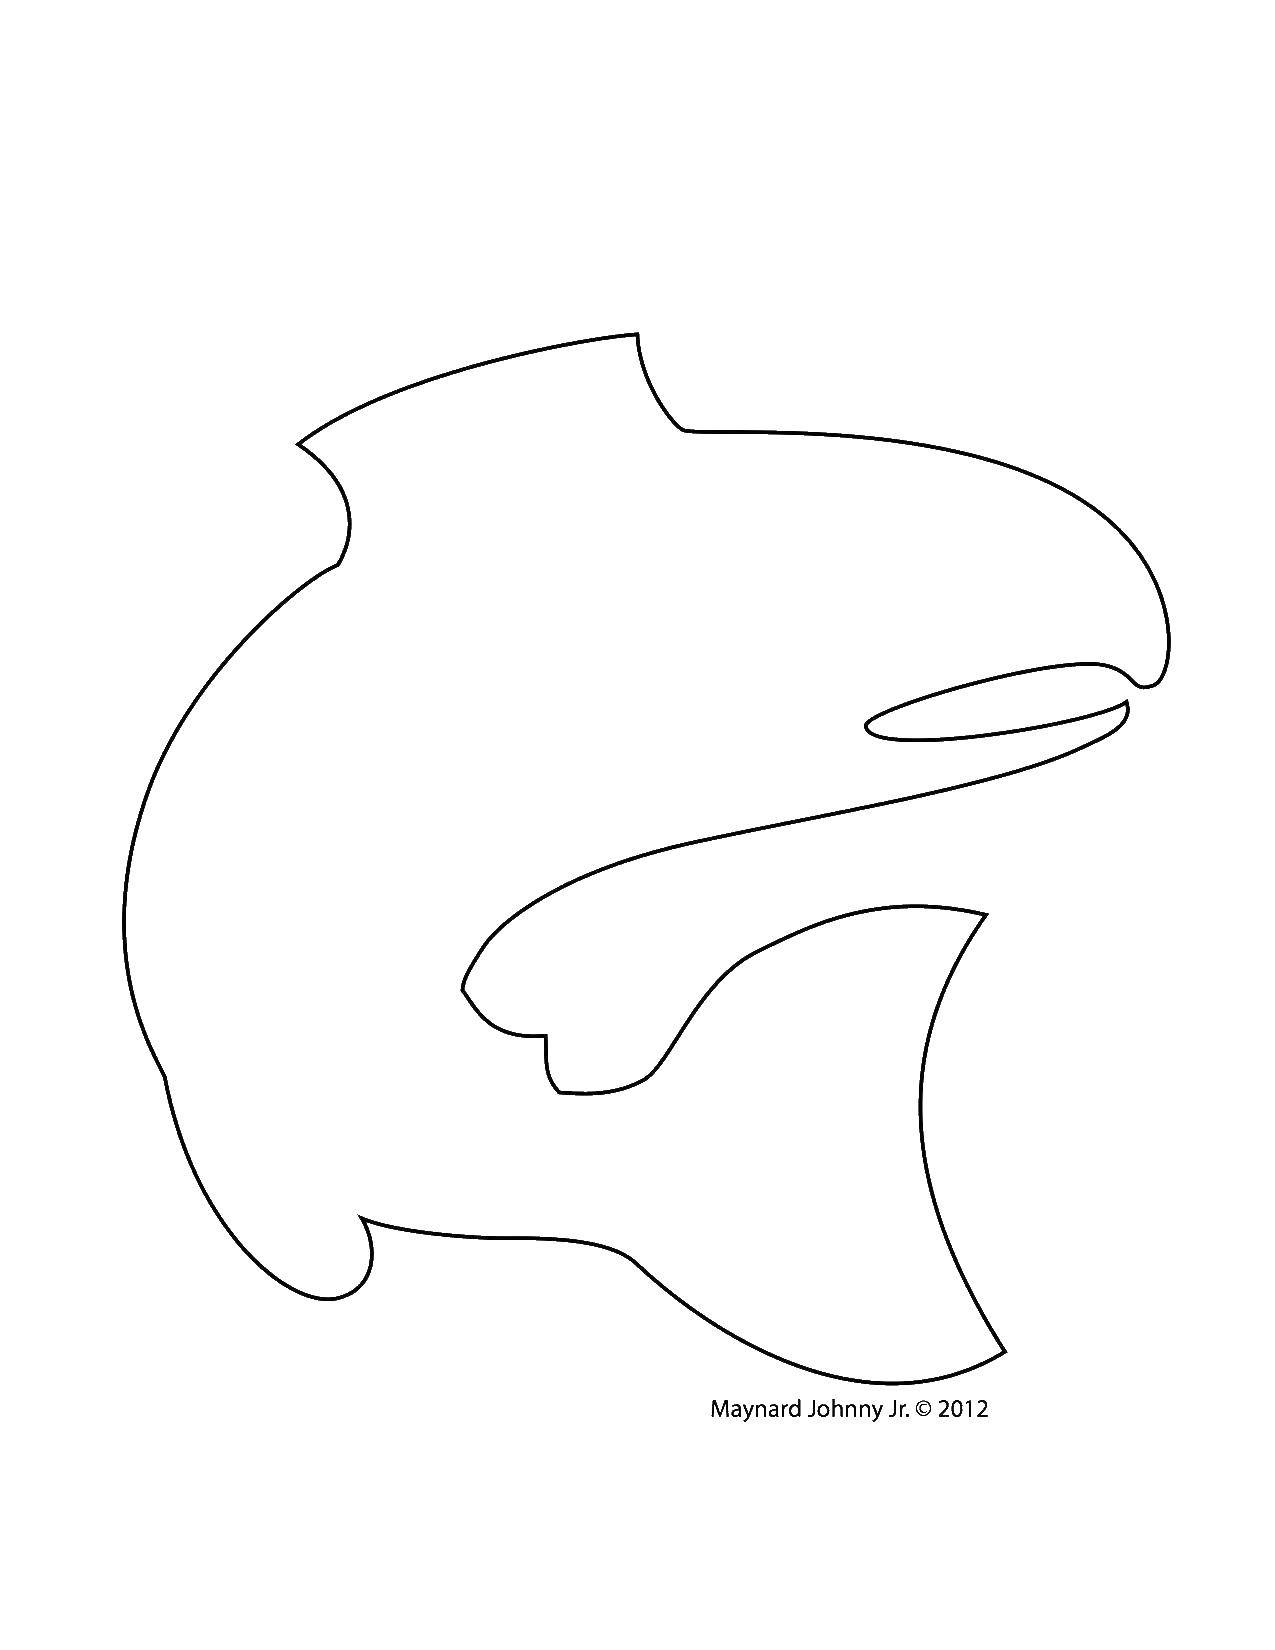 Coloring The outline of the shark. Category The contour of the fish. Tags:  the shark, fish, contour.